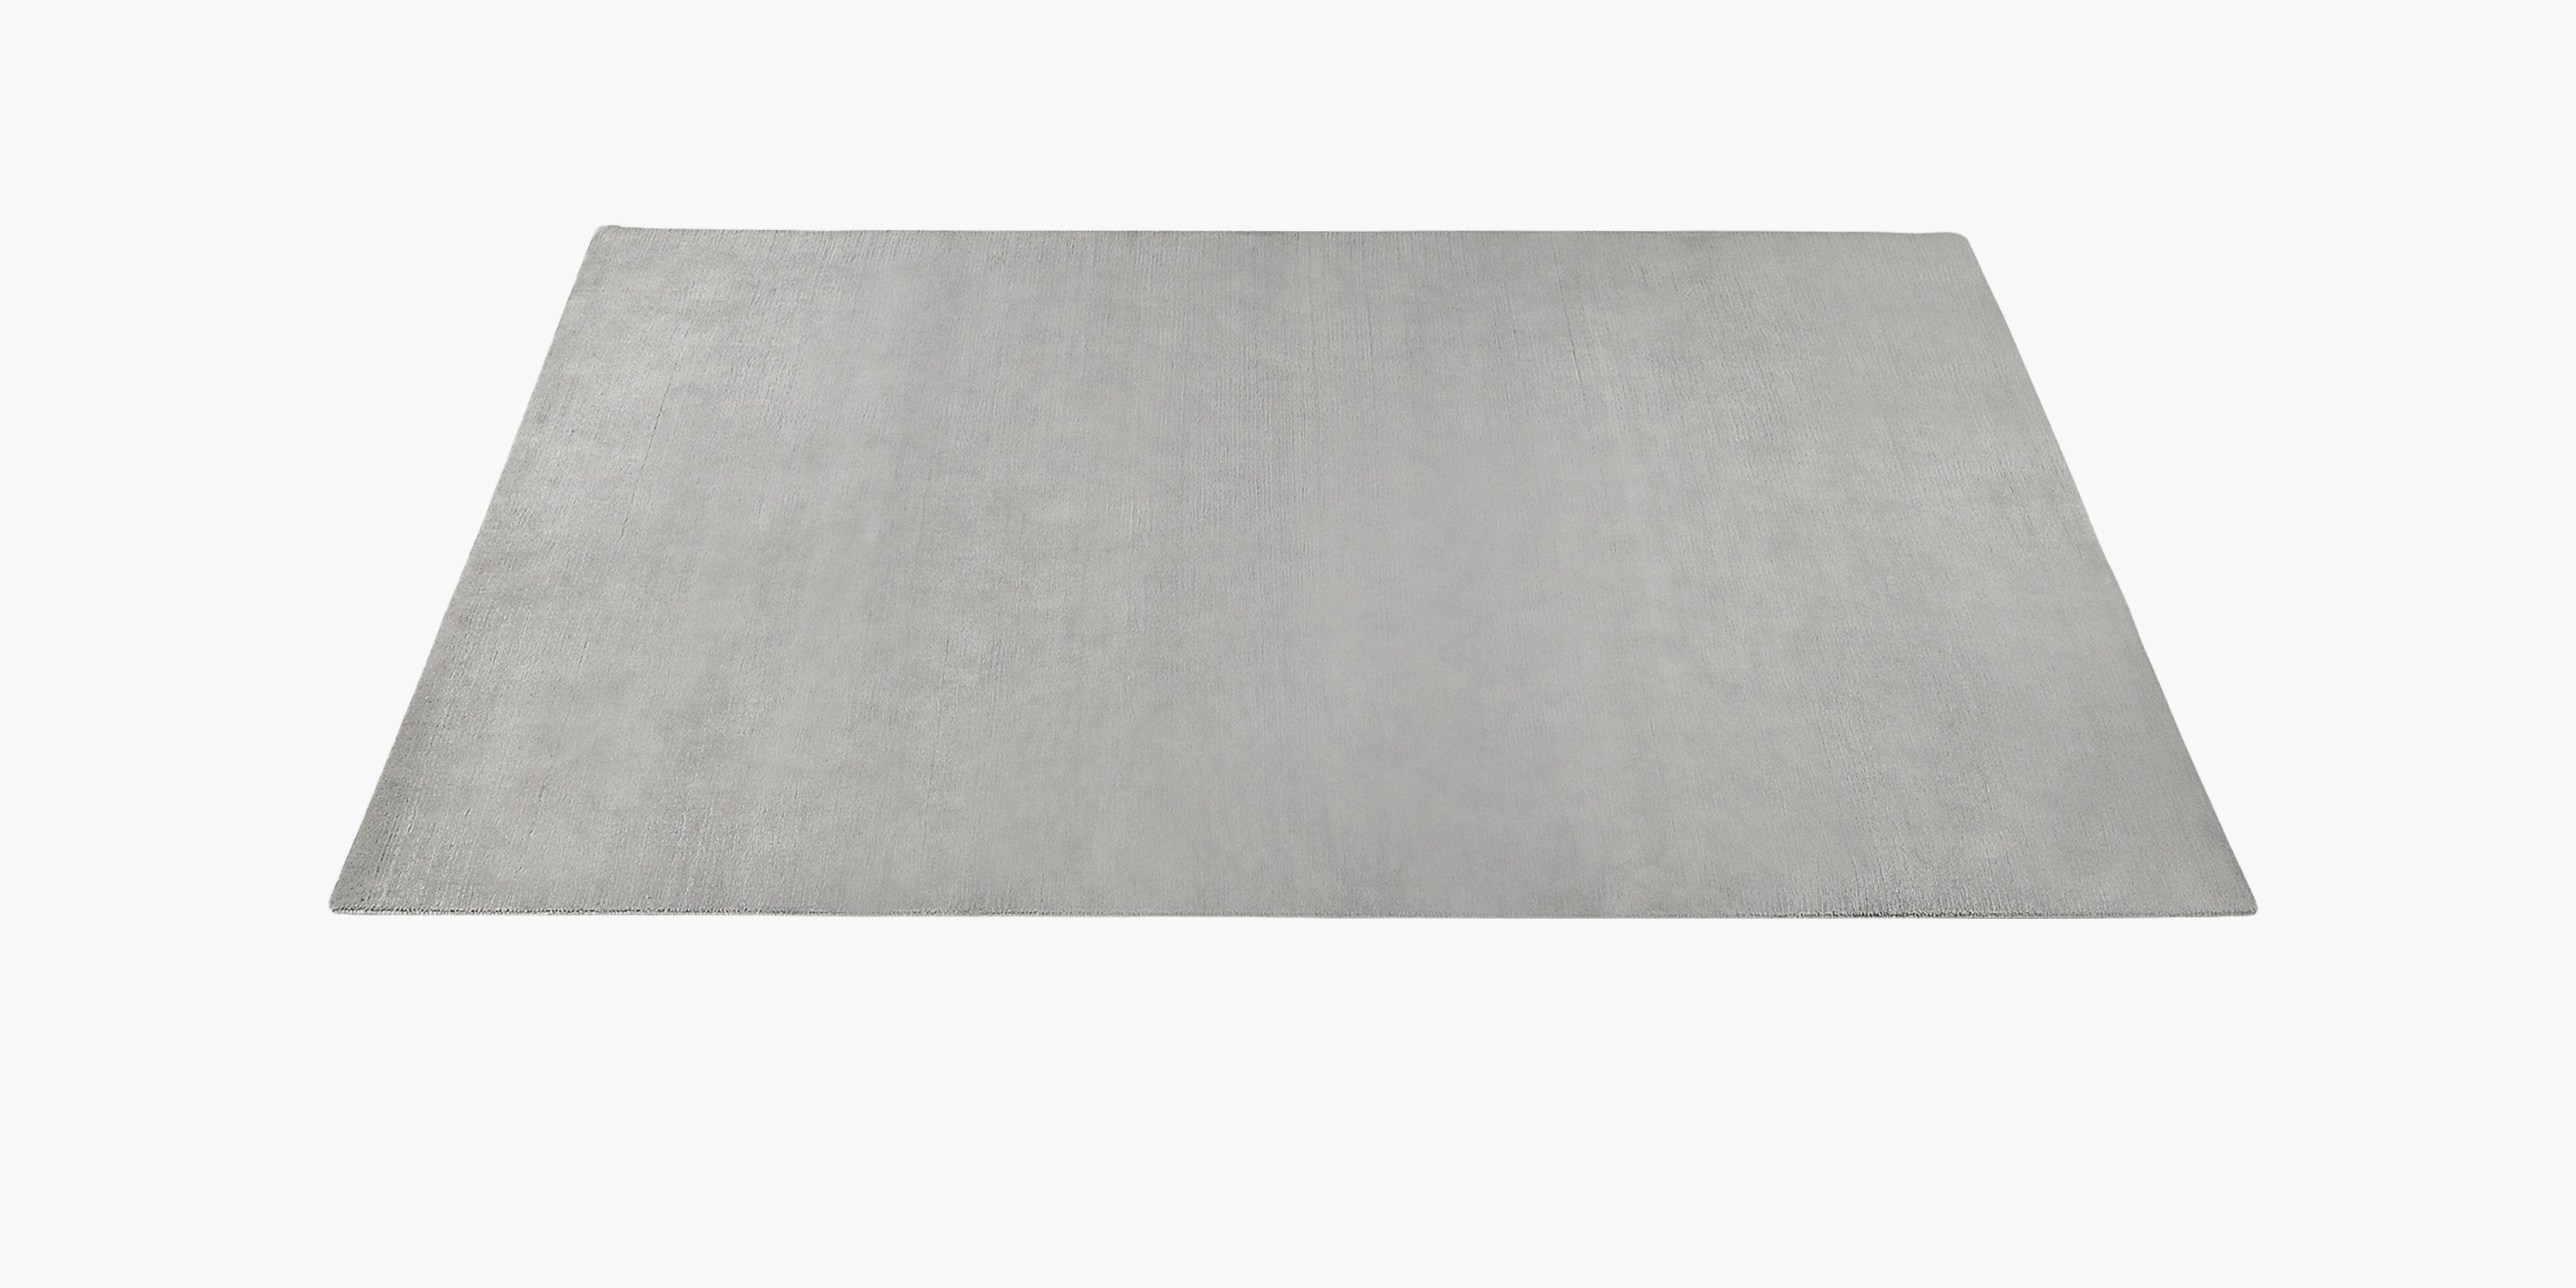 Performance Textra Rug – Grey (Grey / 6' x 9' - PRICE AS MARKED - FINAL SALE)